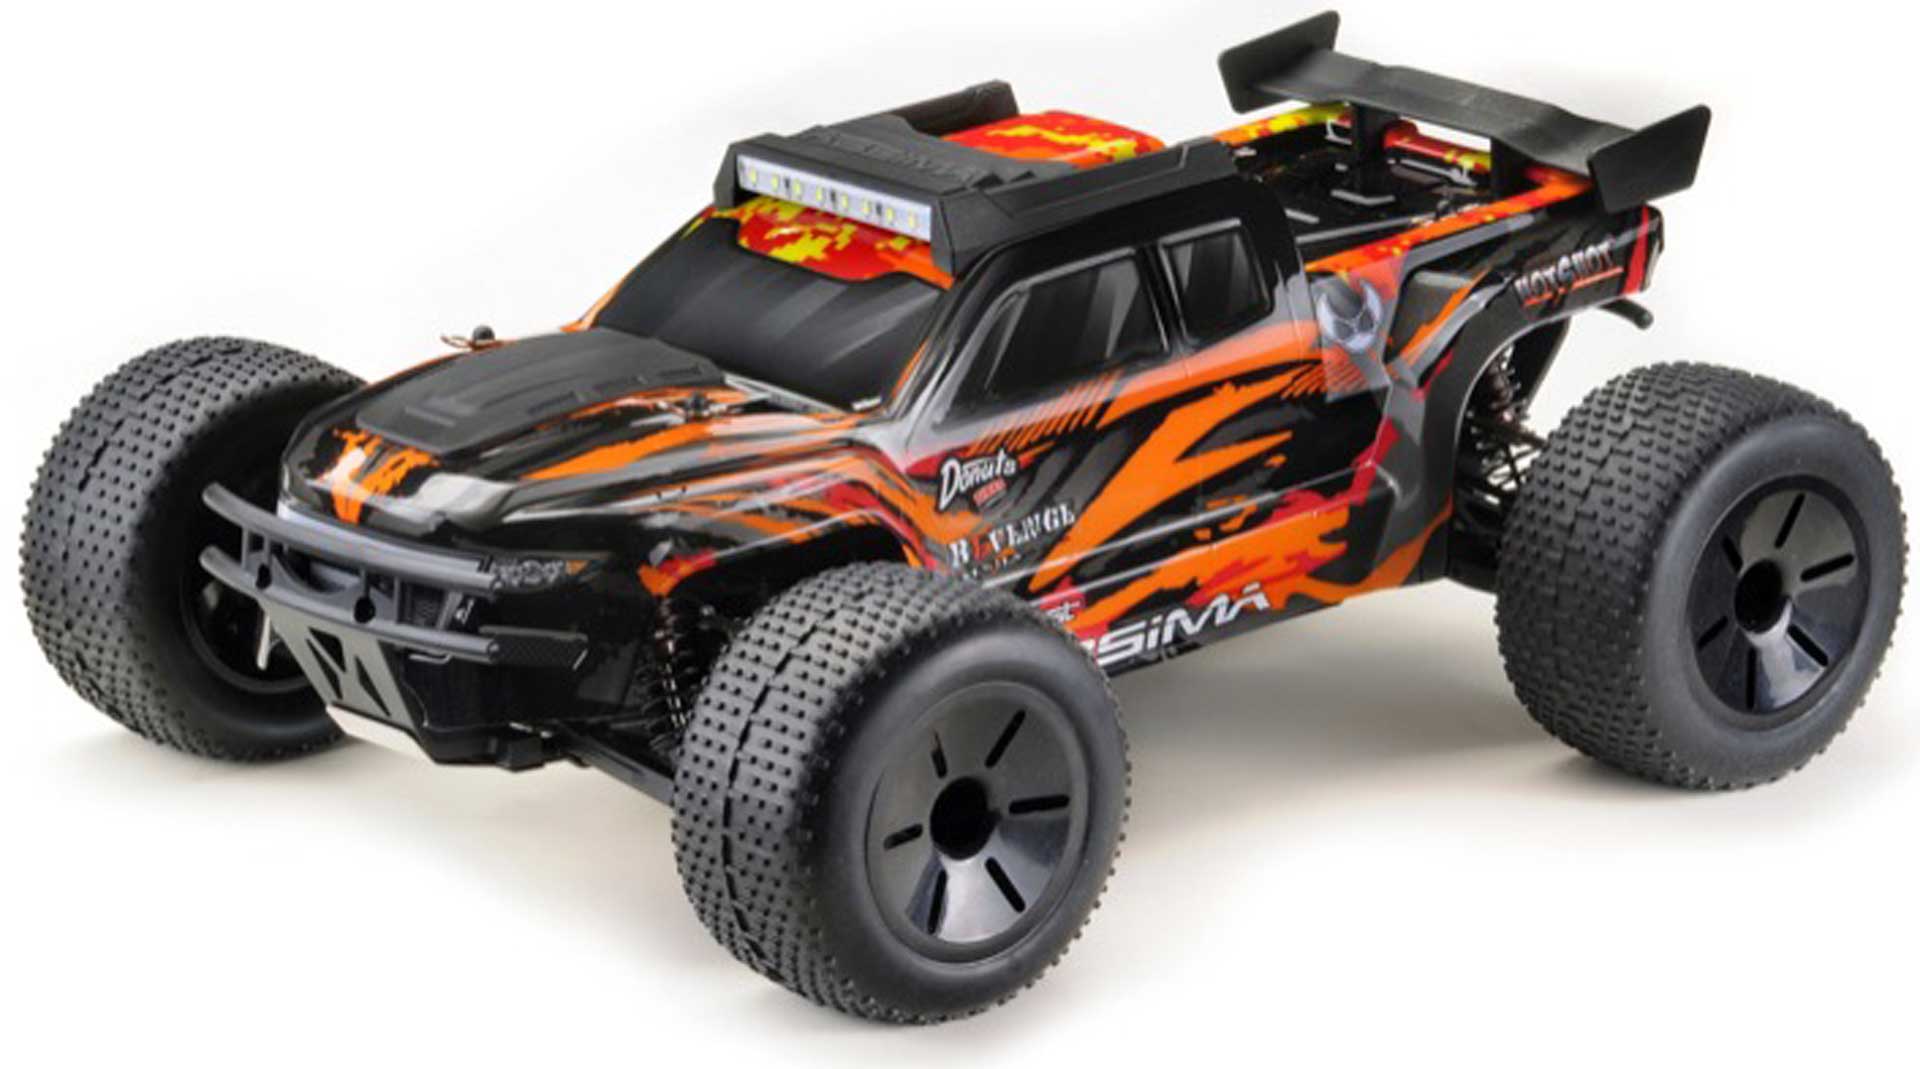 ABSIMA Truggy "AT3.4-V2 BL" 1/10 4WD Brushless RTR